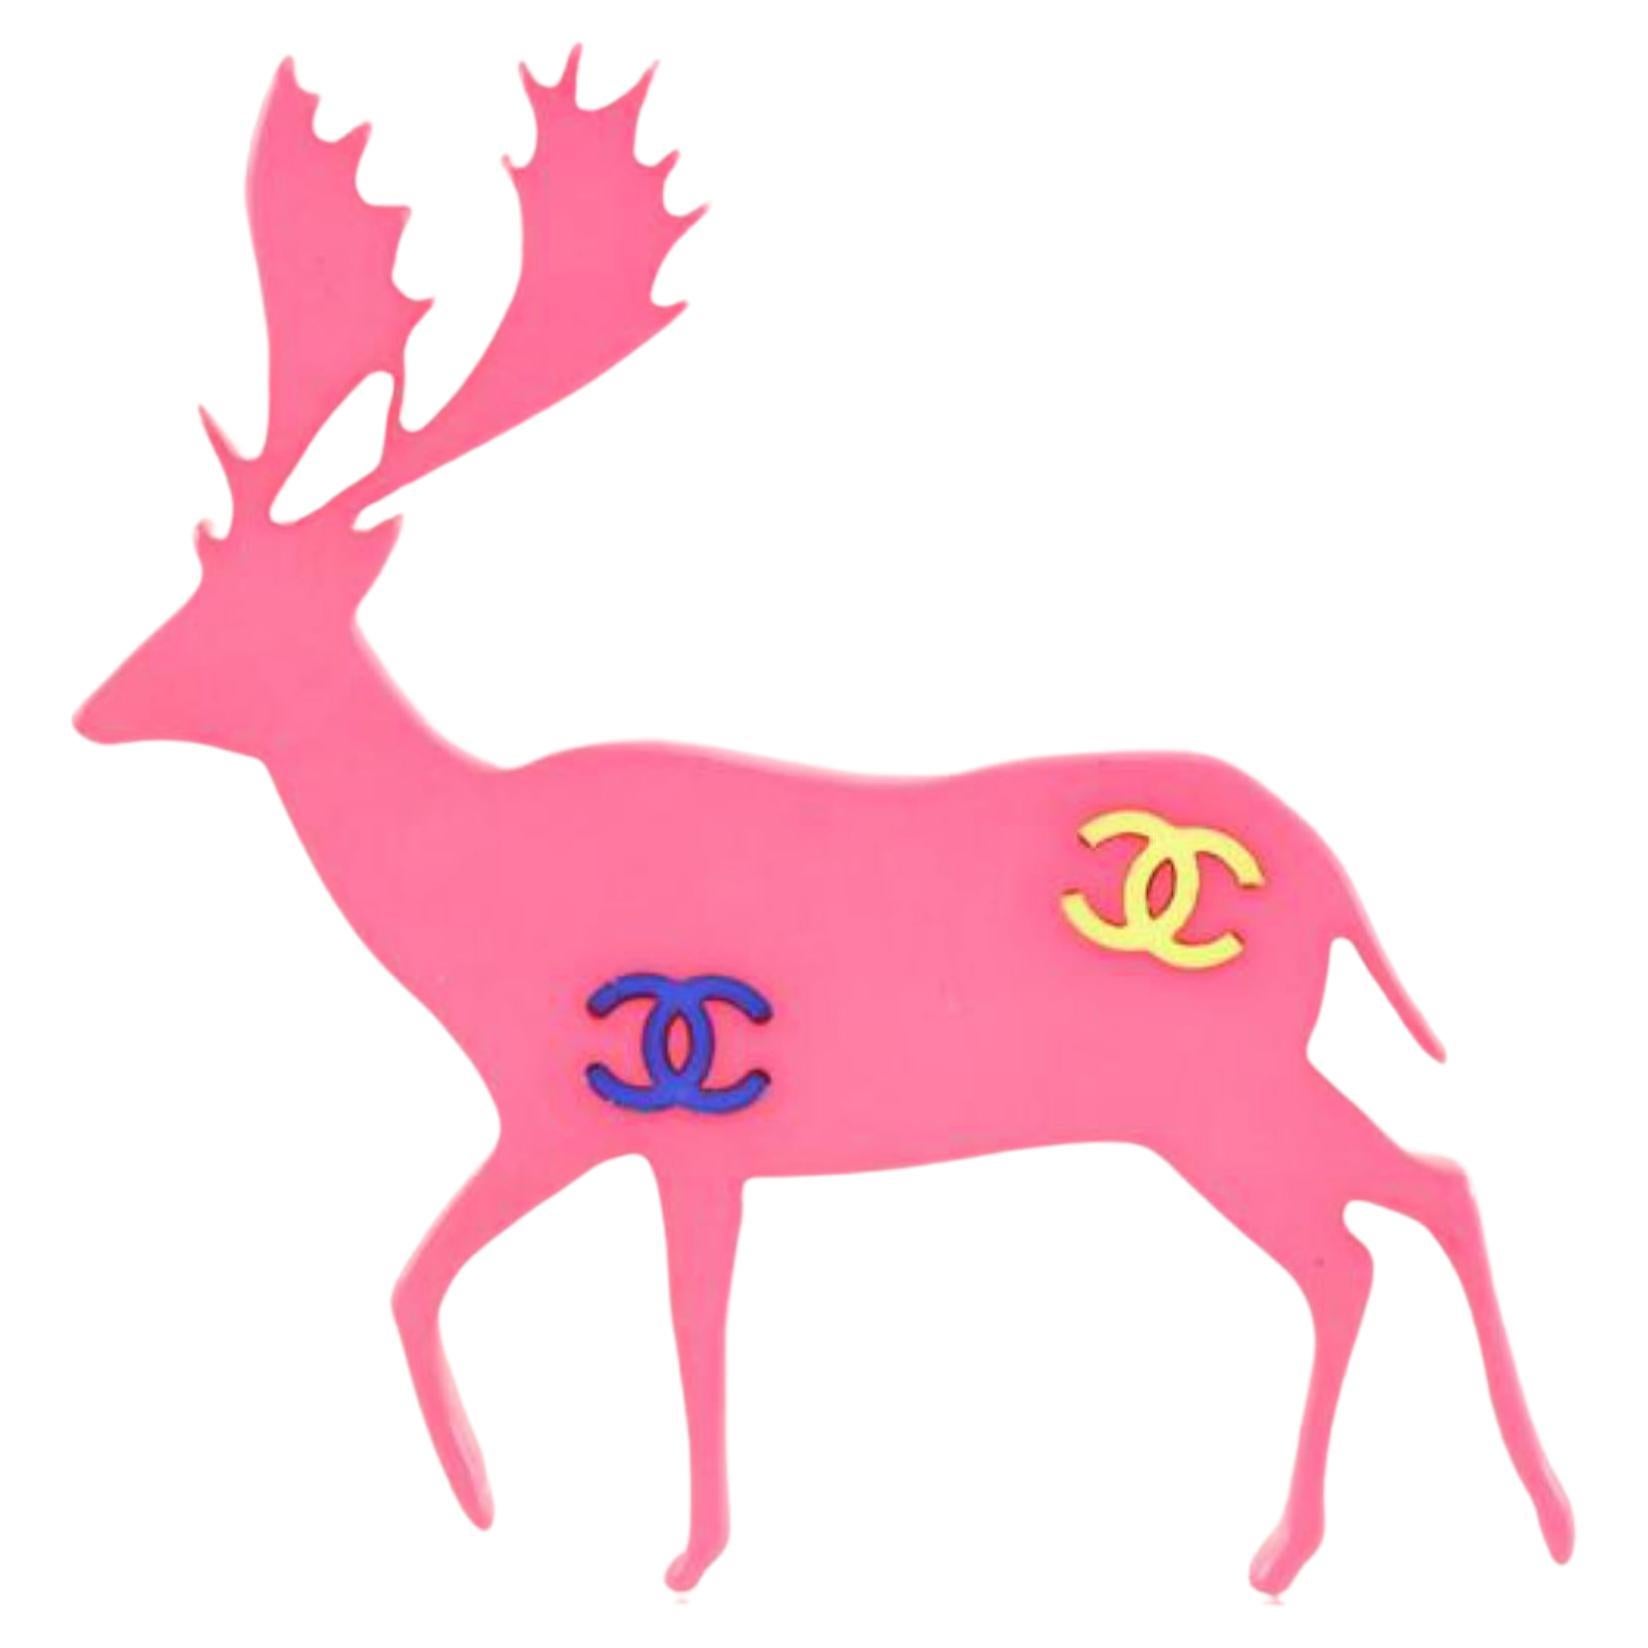 Chanel Pink Christmas Holiday CC Multicolor Reindeer Deer Brooch Pin 21cz76s For Sale